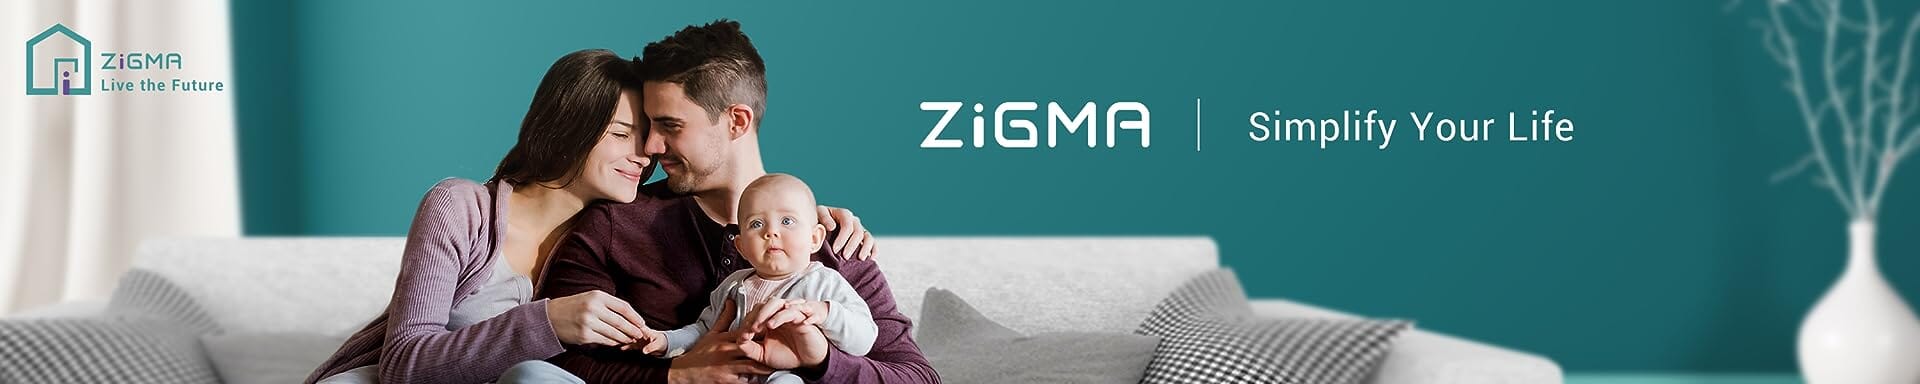 About Zigma